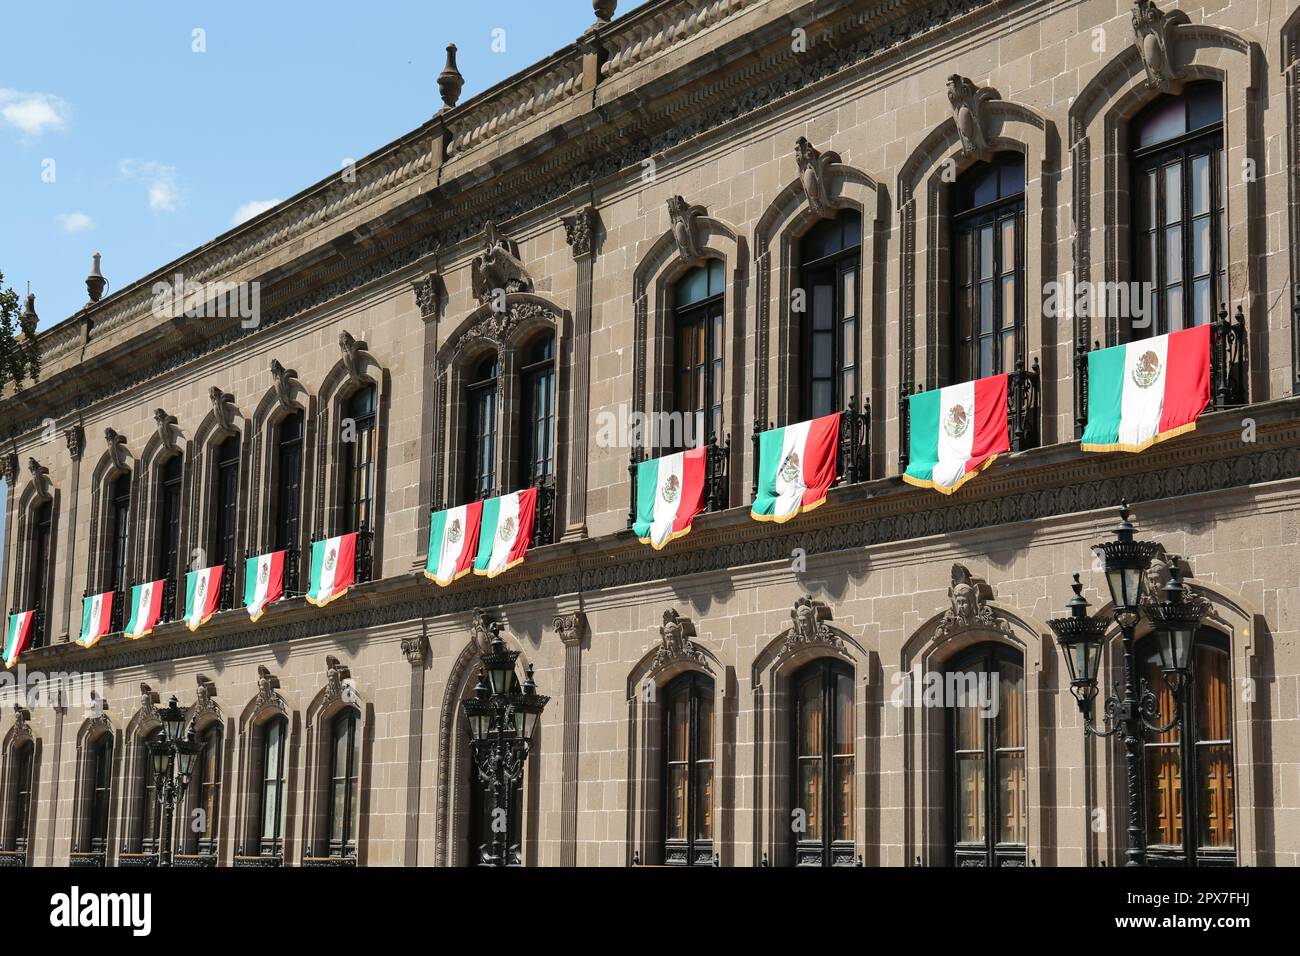 MONTERREY (NUEVO LEON), MEXICO - SEPTEMBER 29, 2022: Beautiful view of Palacio de Gobierno (Government Palace) with flags on sunny day Stock Photo